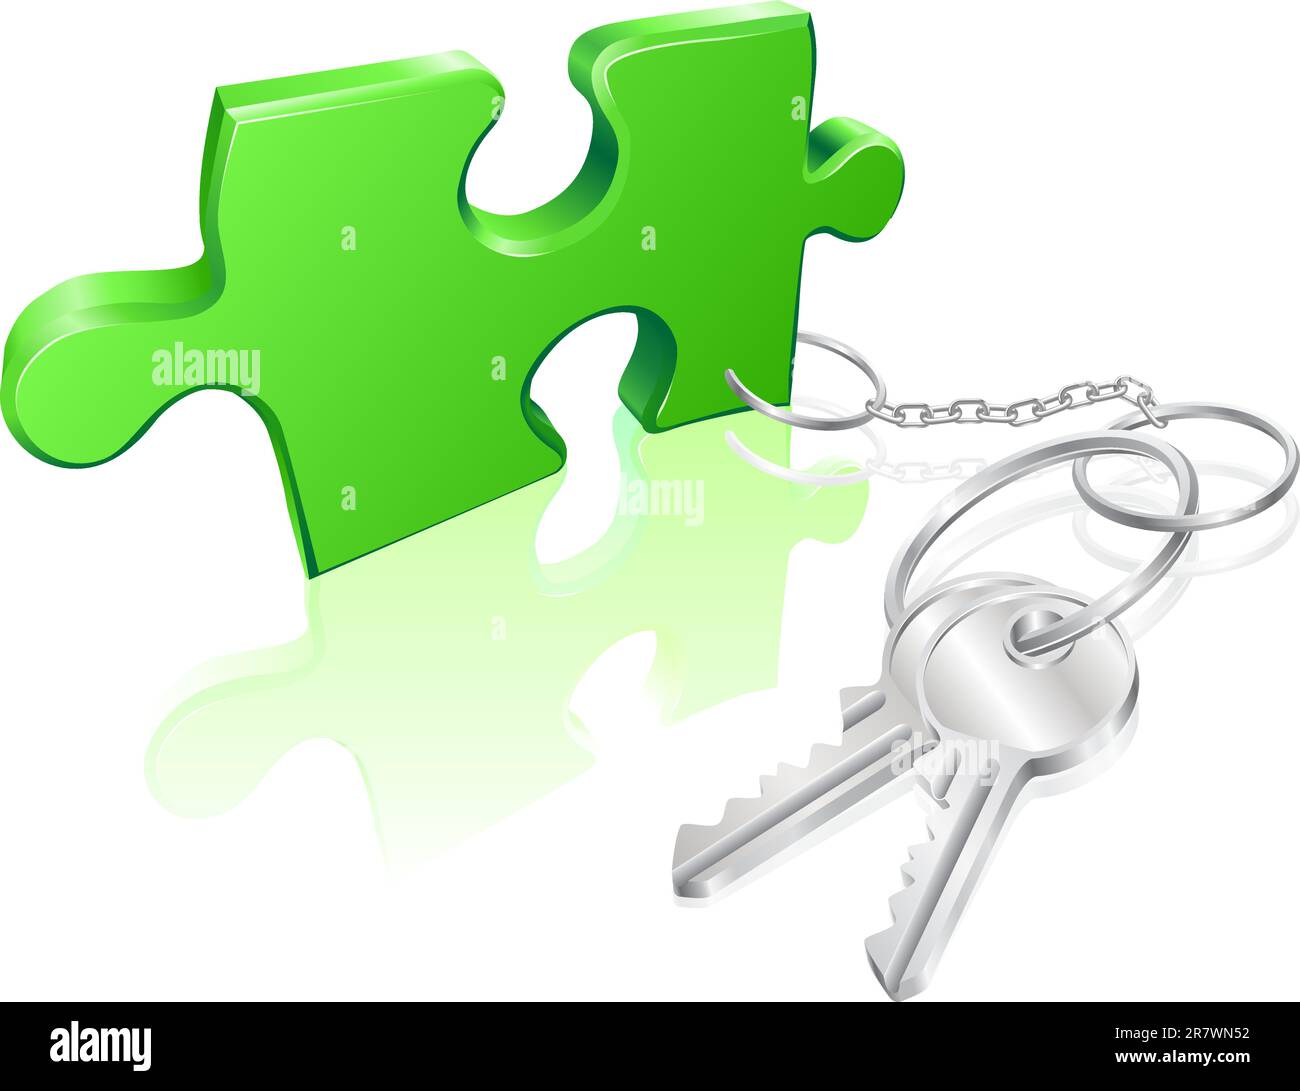 Key attached to jigsaw piece. Concept for solution to a problem Stock Vector